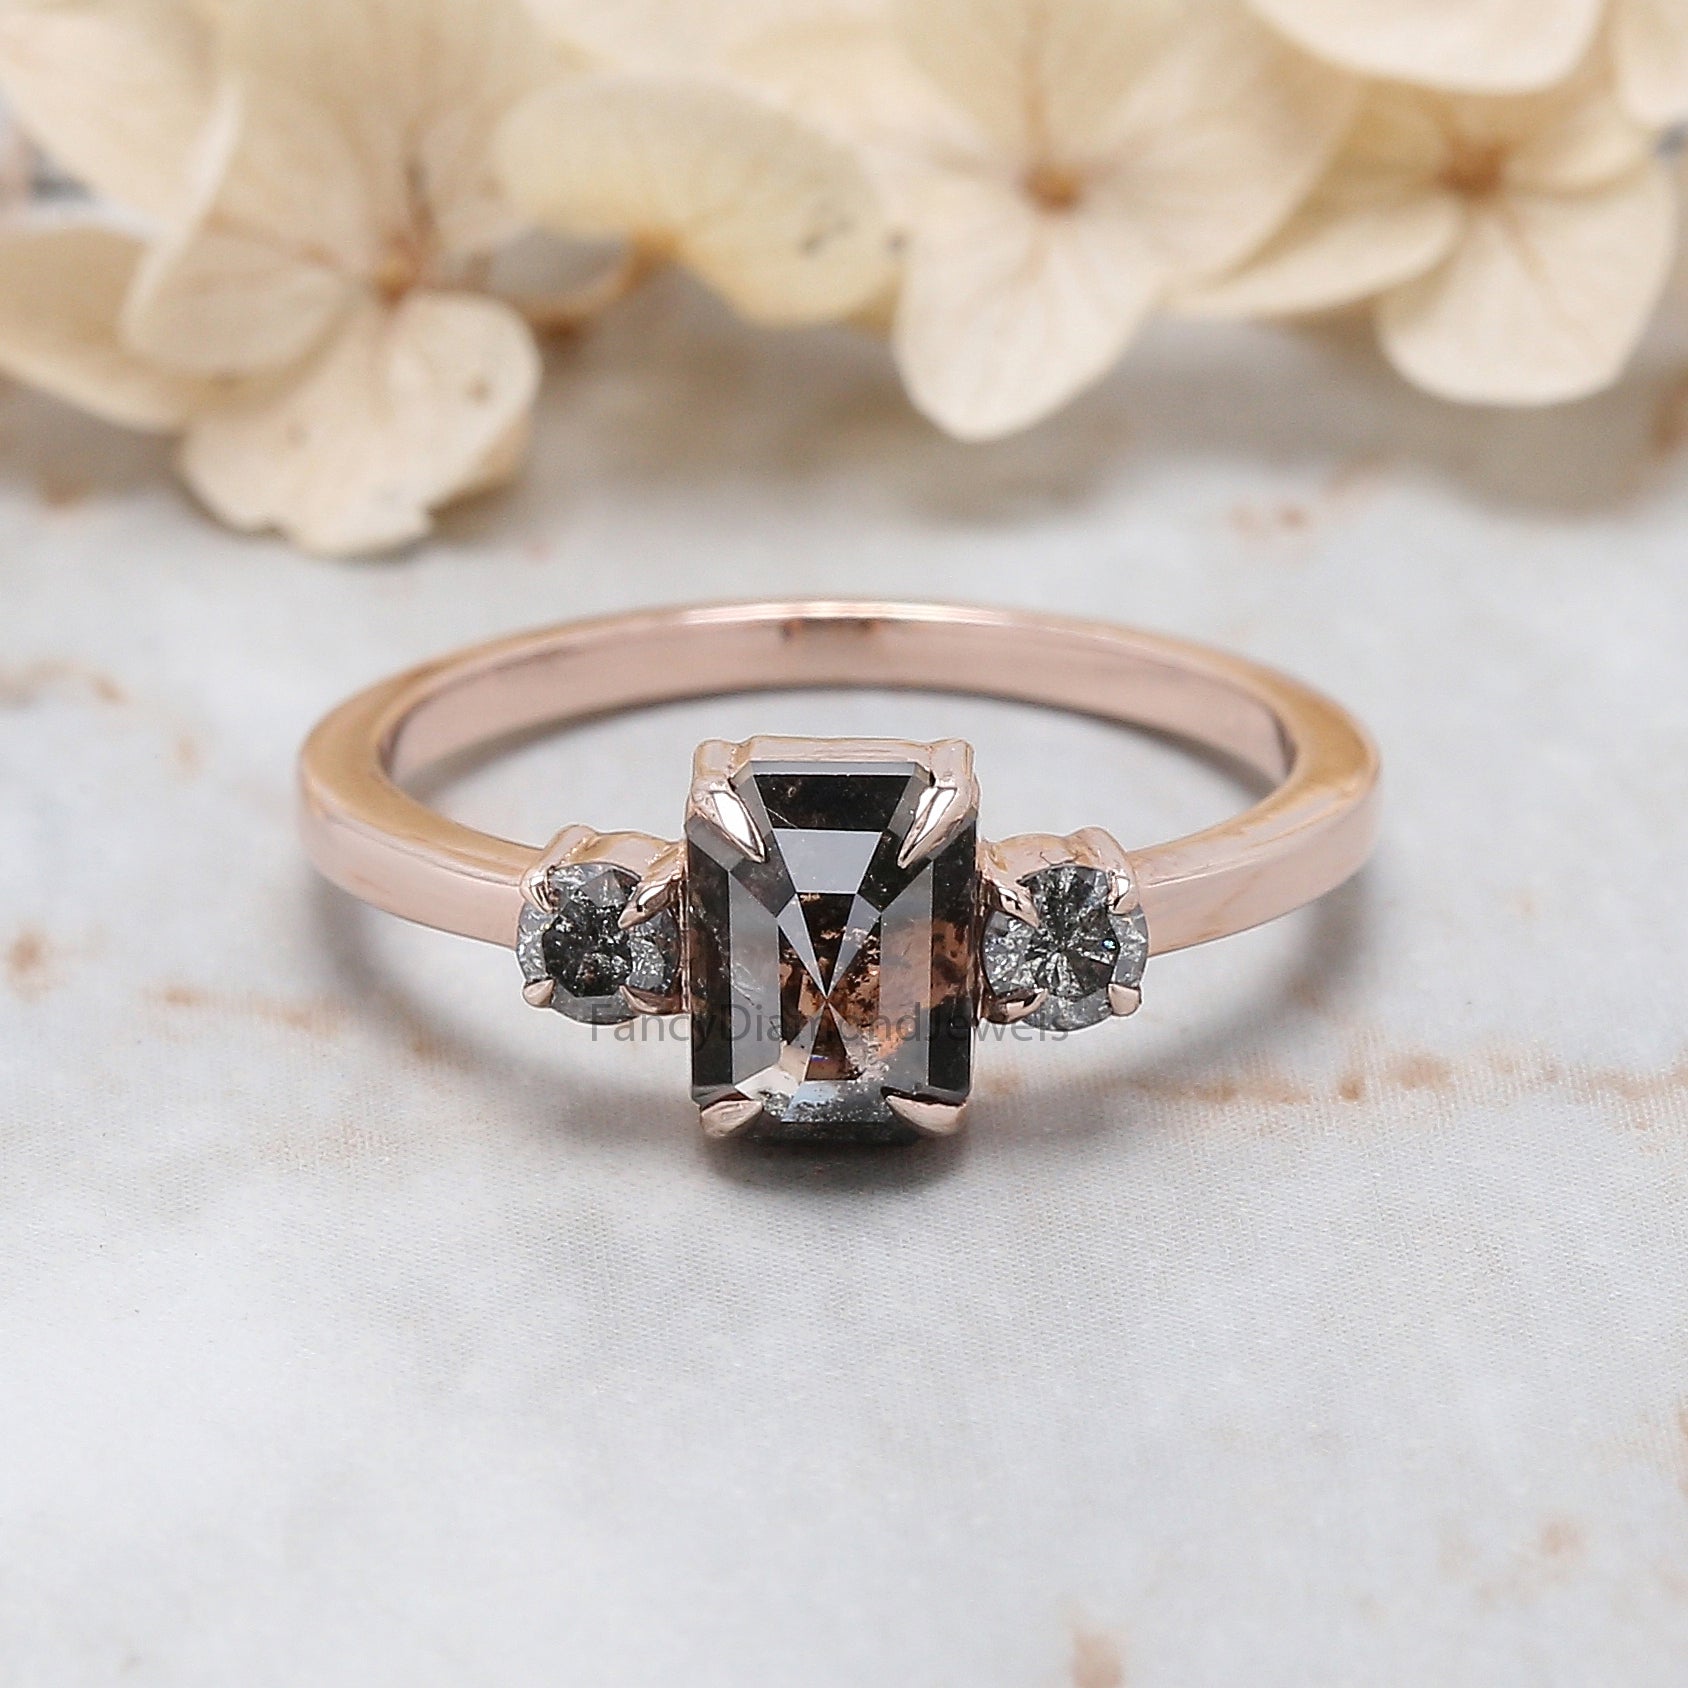 Emerald Cut Black Color Diamond Ring 1.24 Ct 7.00 MM Emerald Diamond Ring 14K Solid Rose Gold Silver Engagement Ring Gift For Her QN615